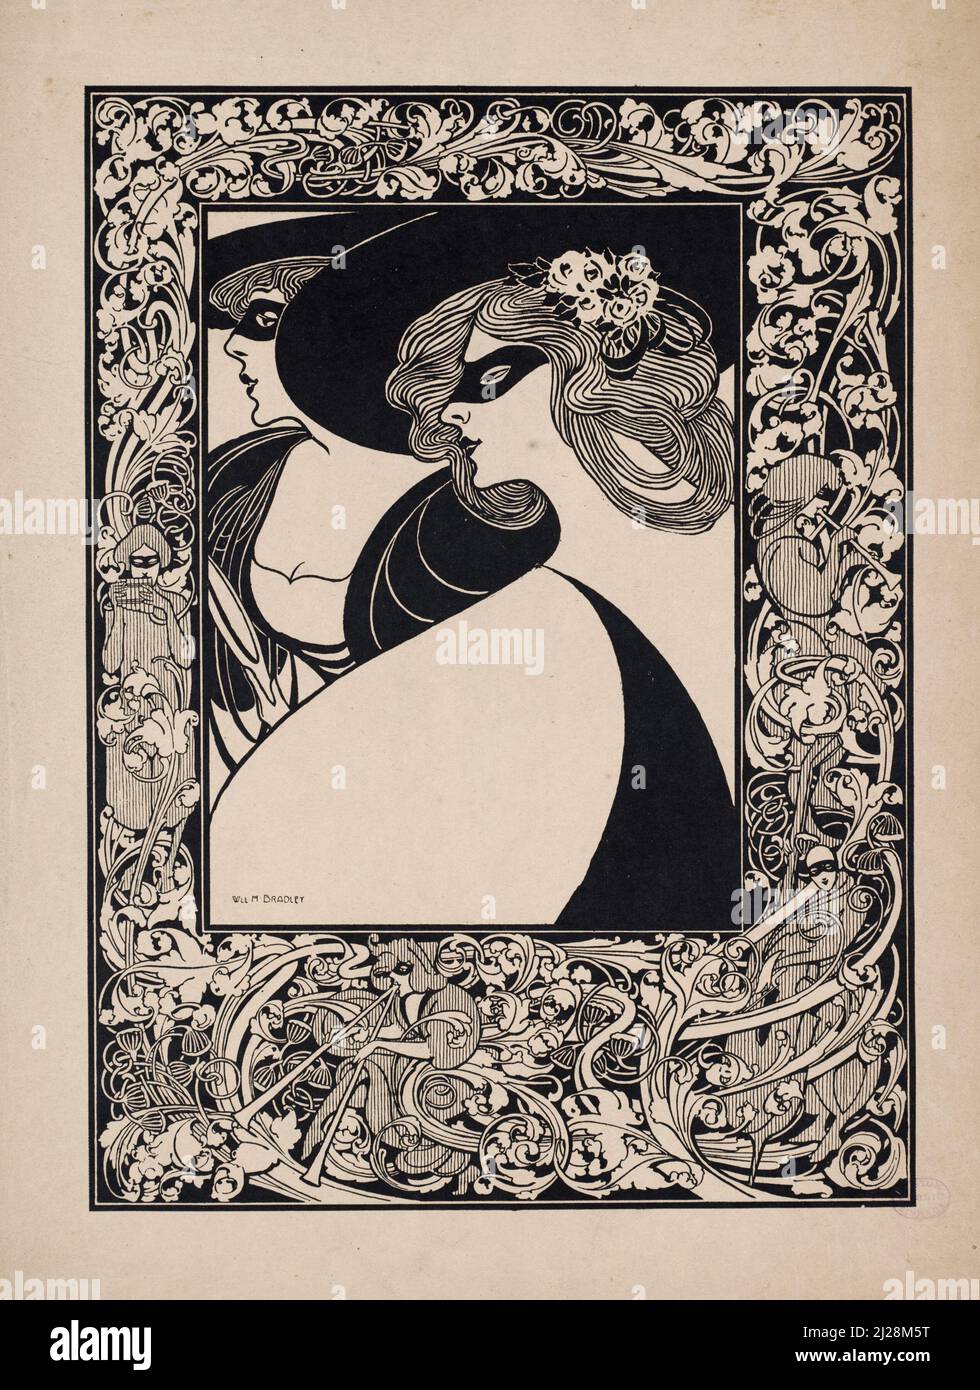 Will Bradley artwork - Two masked women (1890-1920) American Art Nouveau - Old and vintage poster / Magazine cover in black and white. Stock Photo